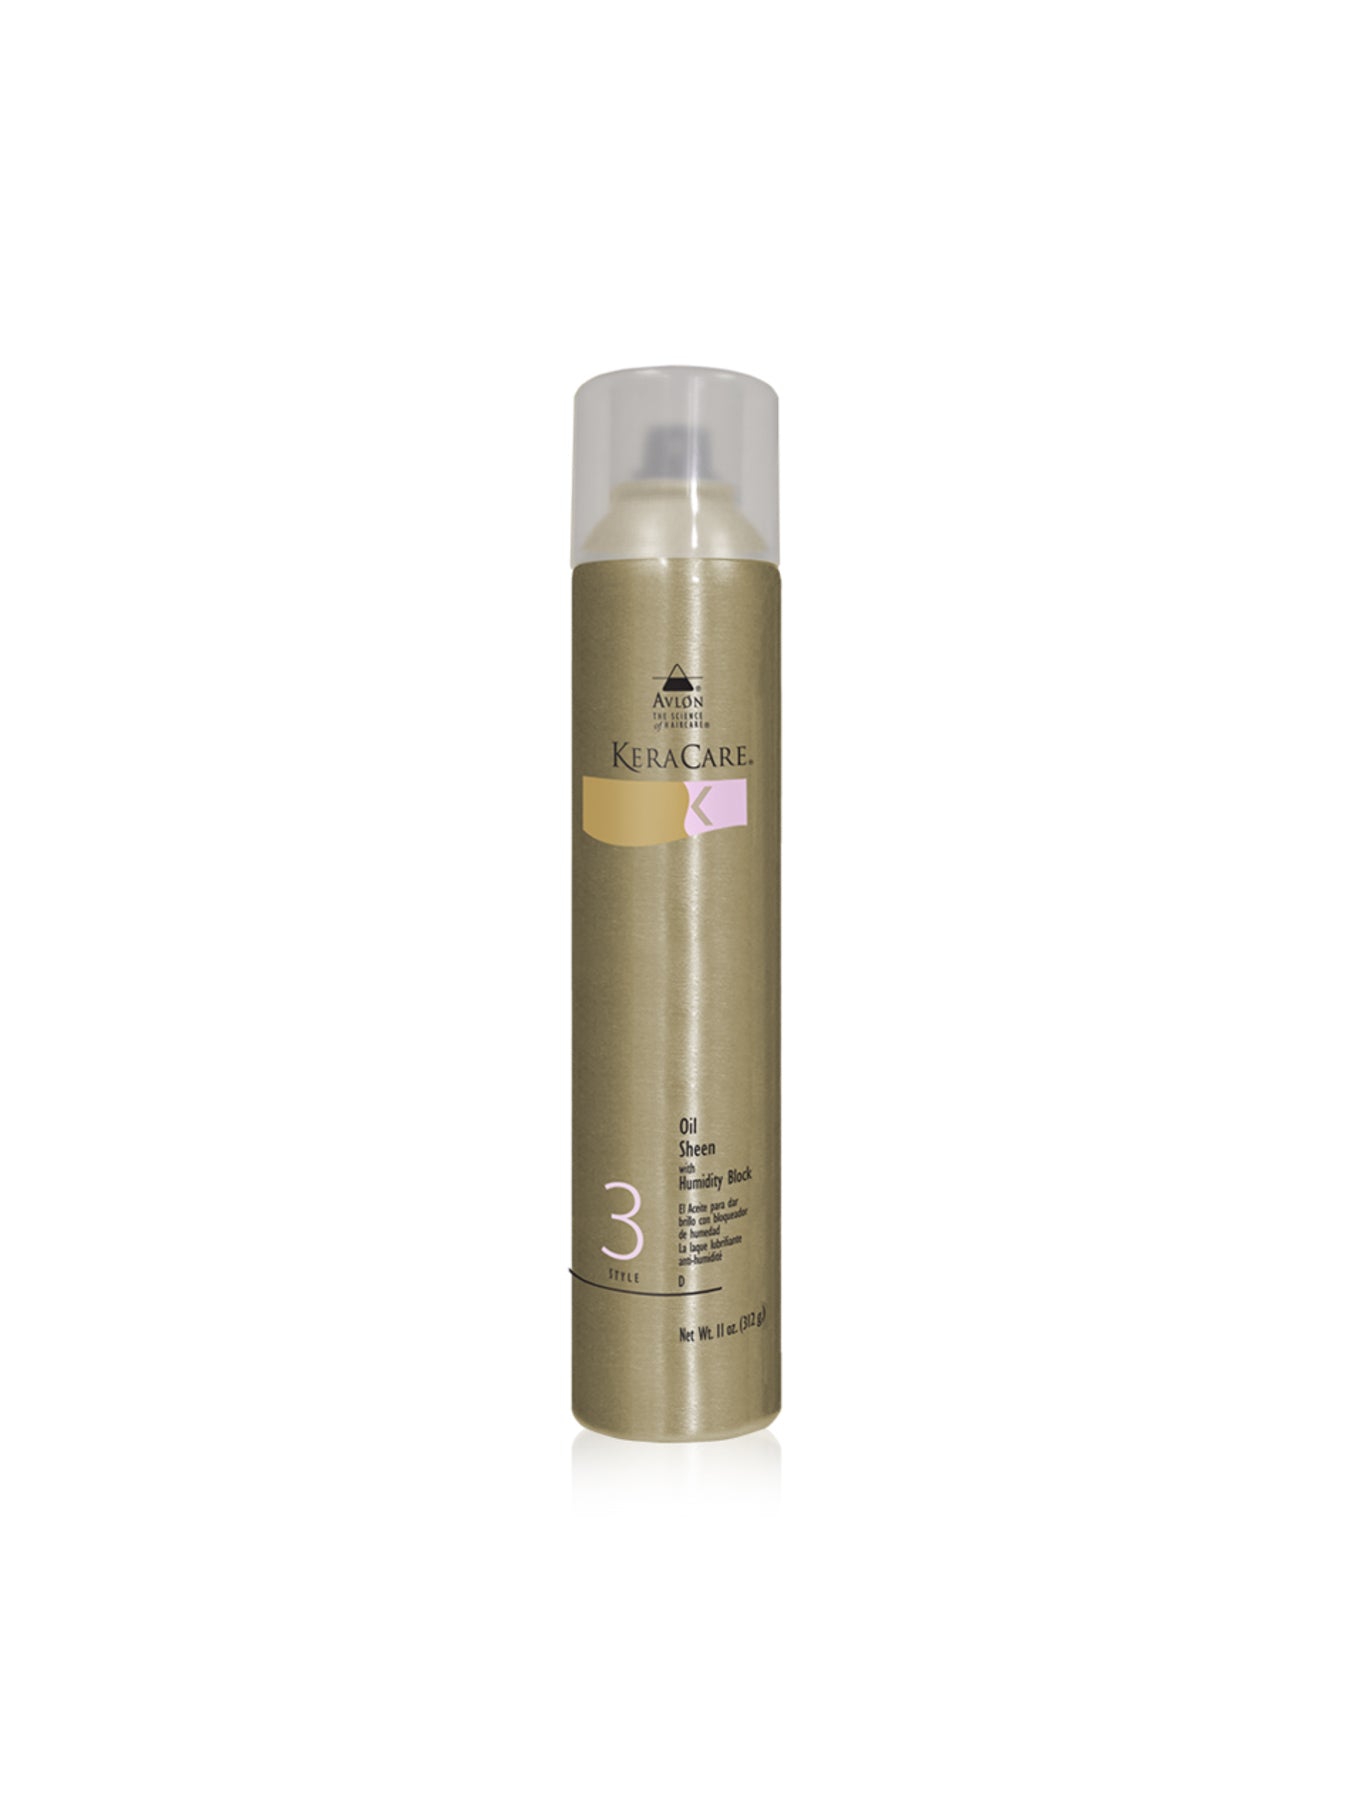 KeraCare Oil Sheen With Humidity Block